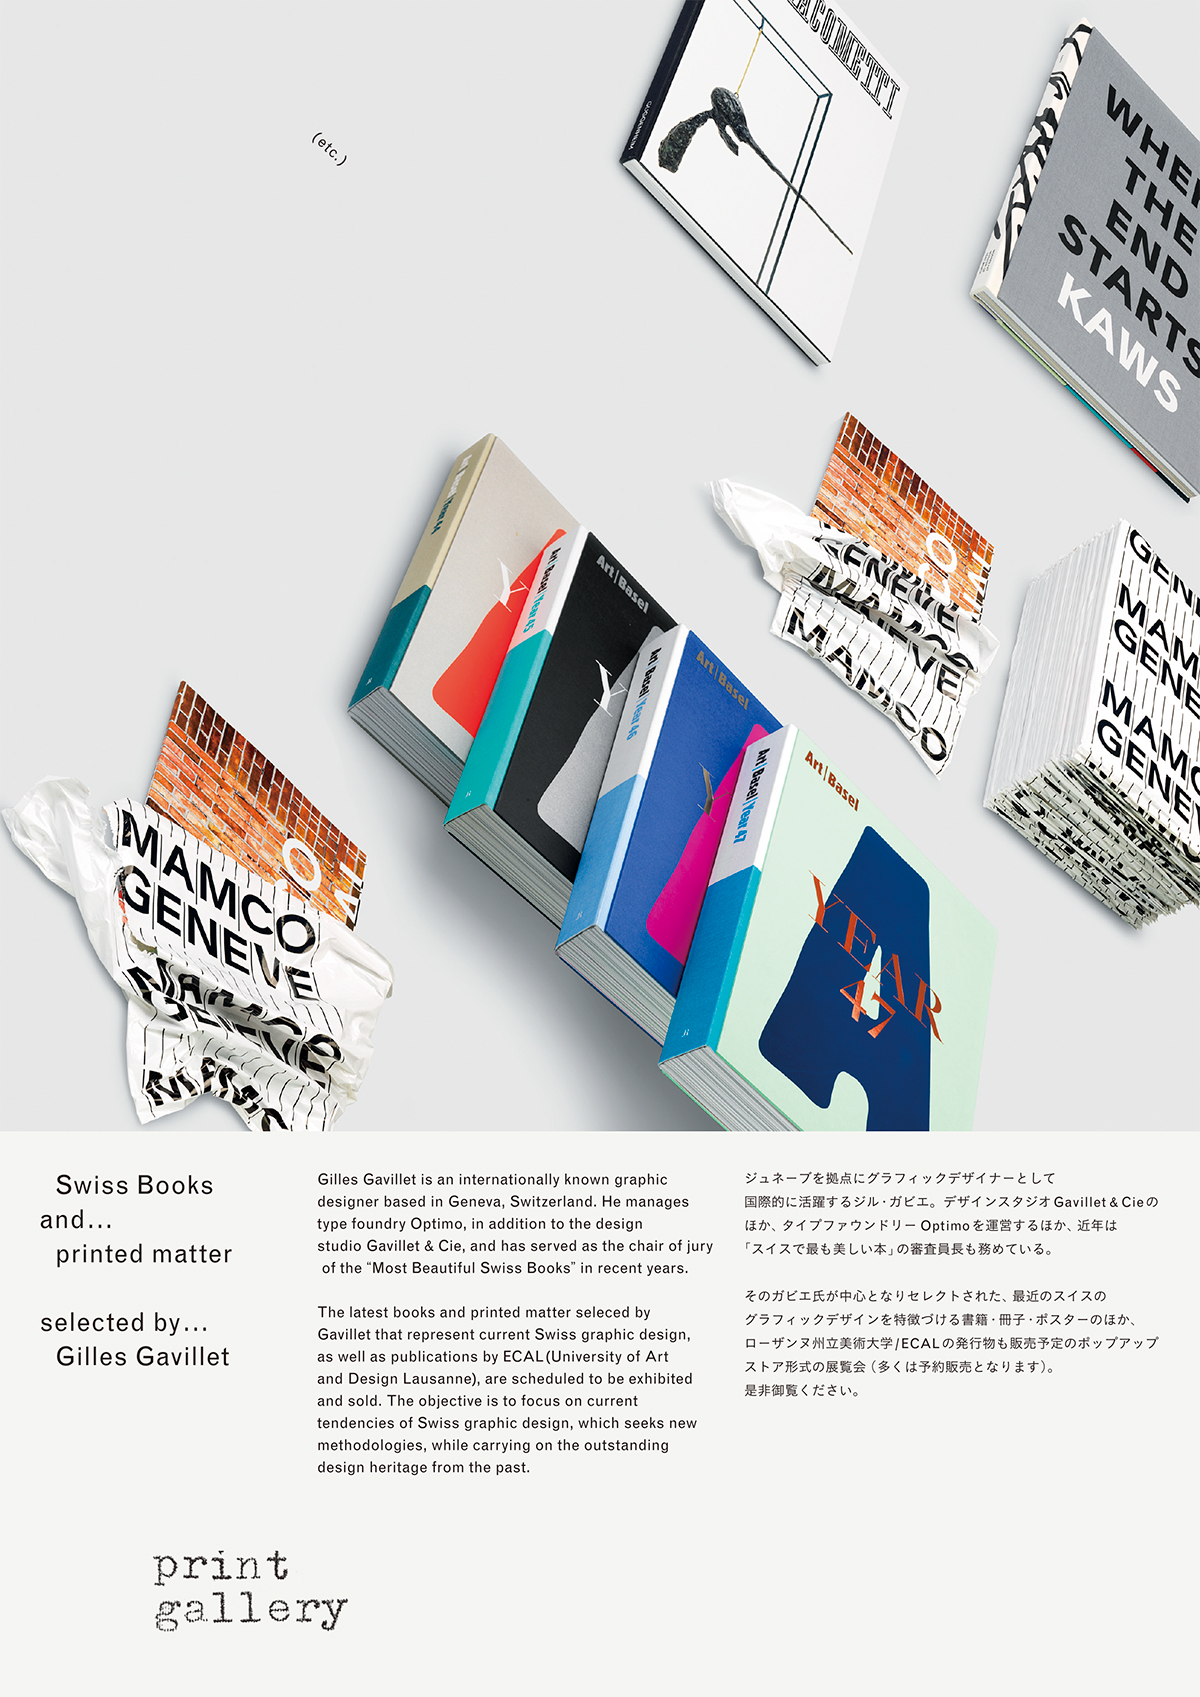 Swiss Books and printed matter selected by Gilles Gavillet